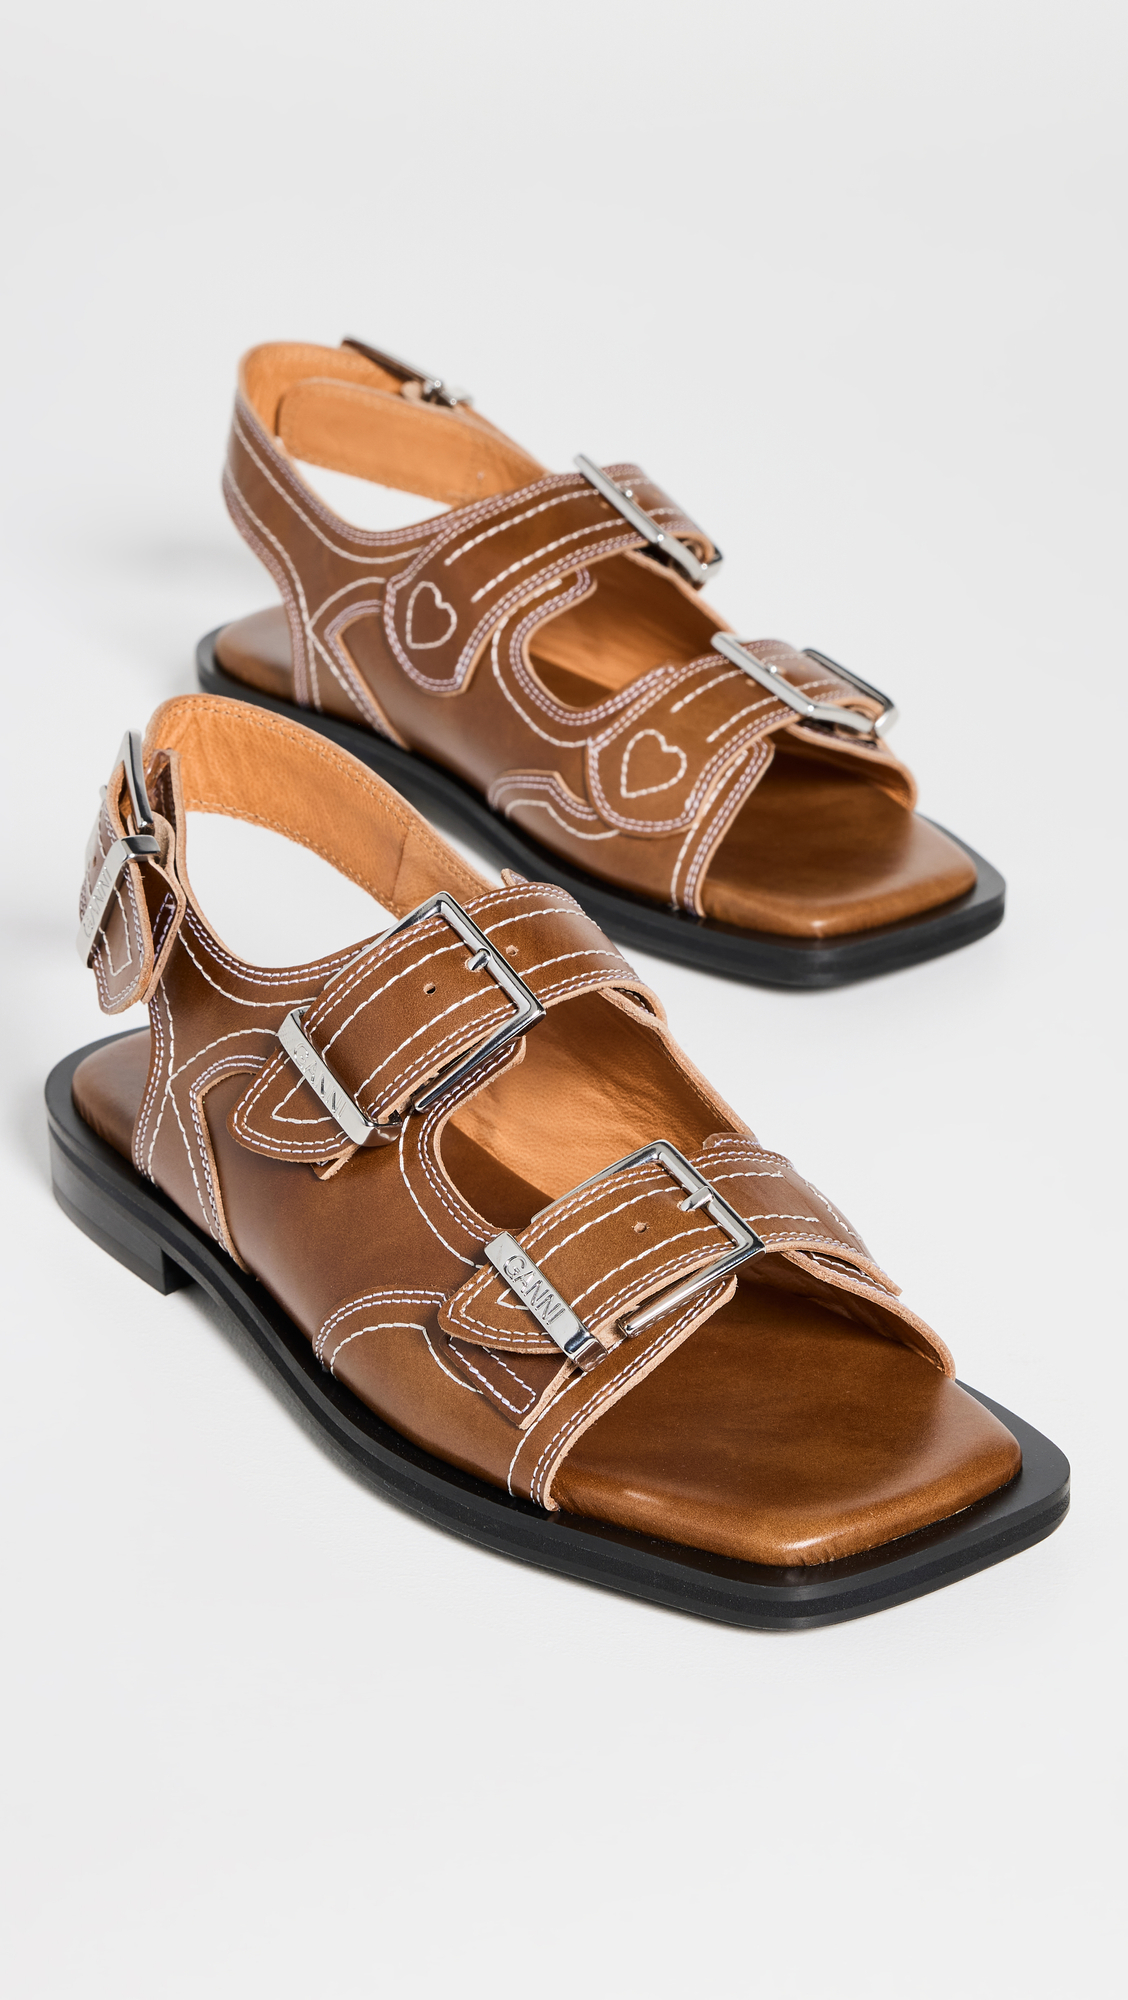 Ganni Embroidered Western Sandals - Realry: A global fashion sites